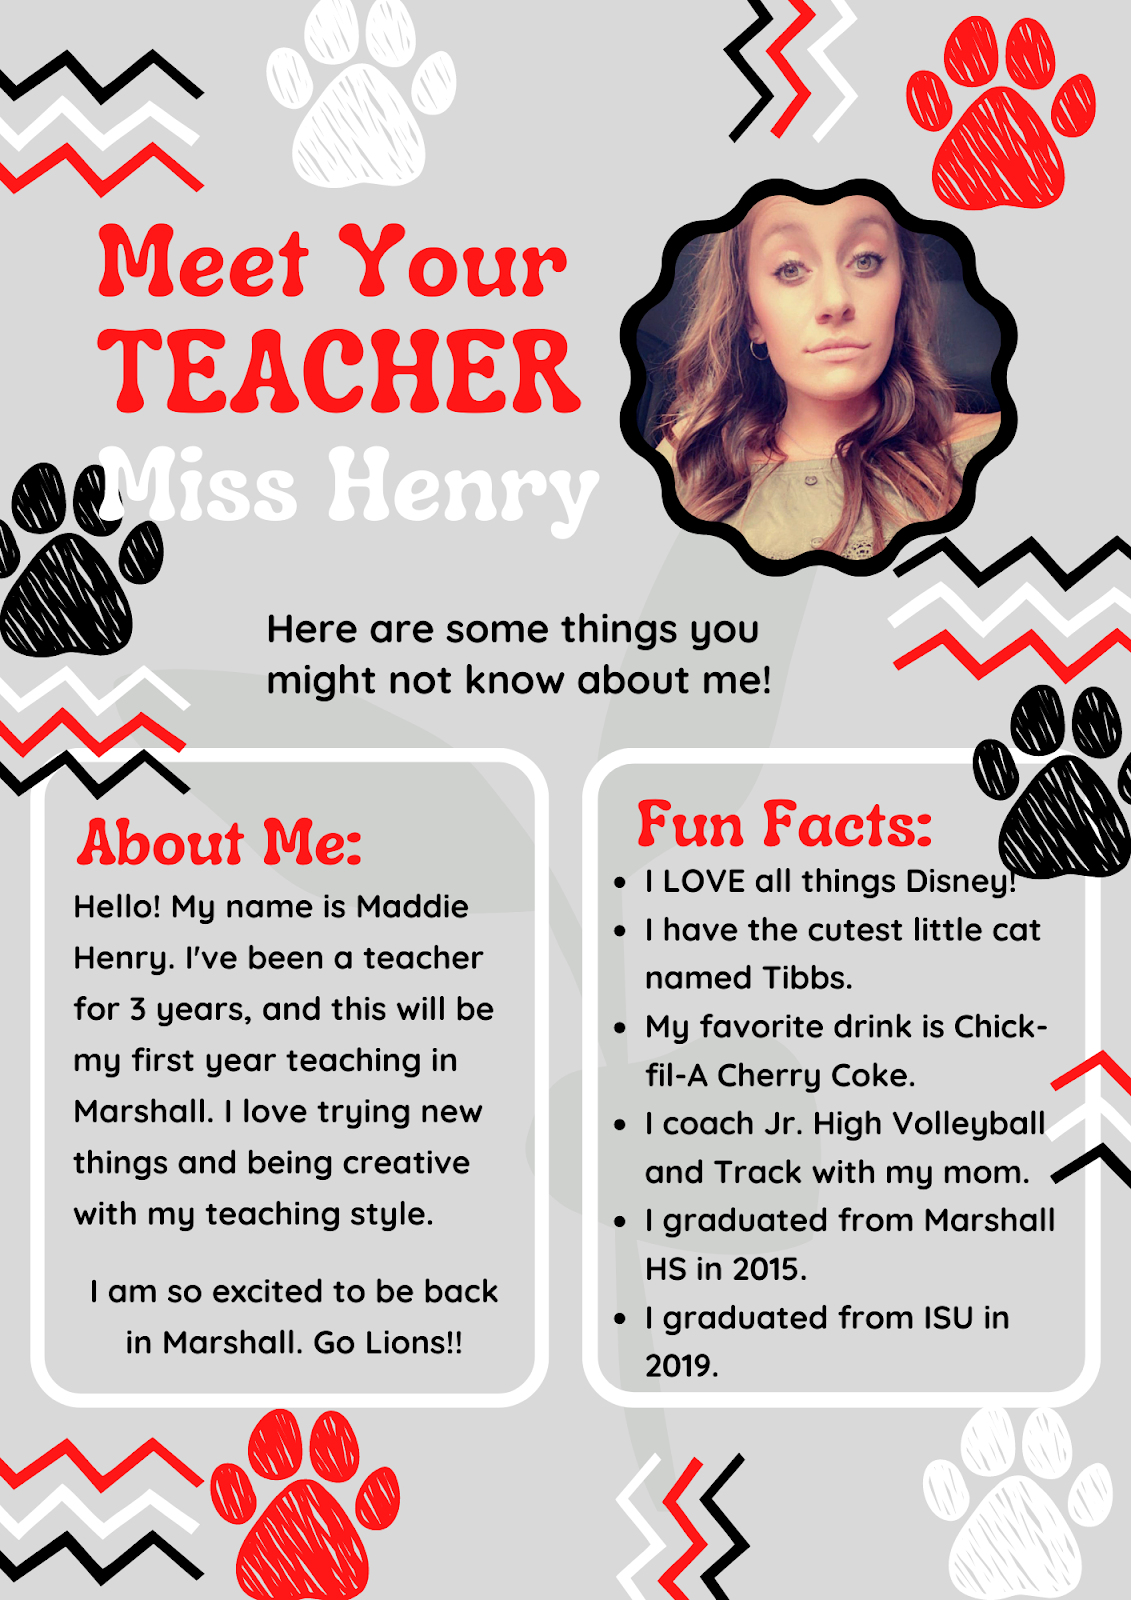 Meet your teacher miss henry. here are some things you might not know about me. about me, hello! my name is maddie henry. I've been a teacher for 3 years and this will be my first year teaching in Marshall. I love trying new things and being creative with my teaching style. I am so excited to be back in Marshall. Go Lions!! Fun facts: I love all things Disney! I have the cutest little cat named Tibbs. My favorite drink is Chick-fil-A cherry coke. I coach junior high volleyball and track with my mom. I graduated from marshall high school in 2015. I graduated from ISU in 2019. 